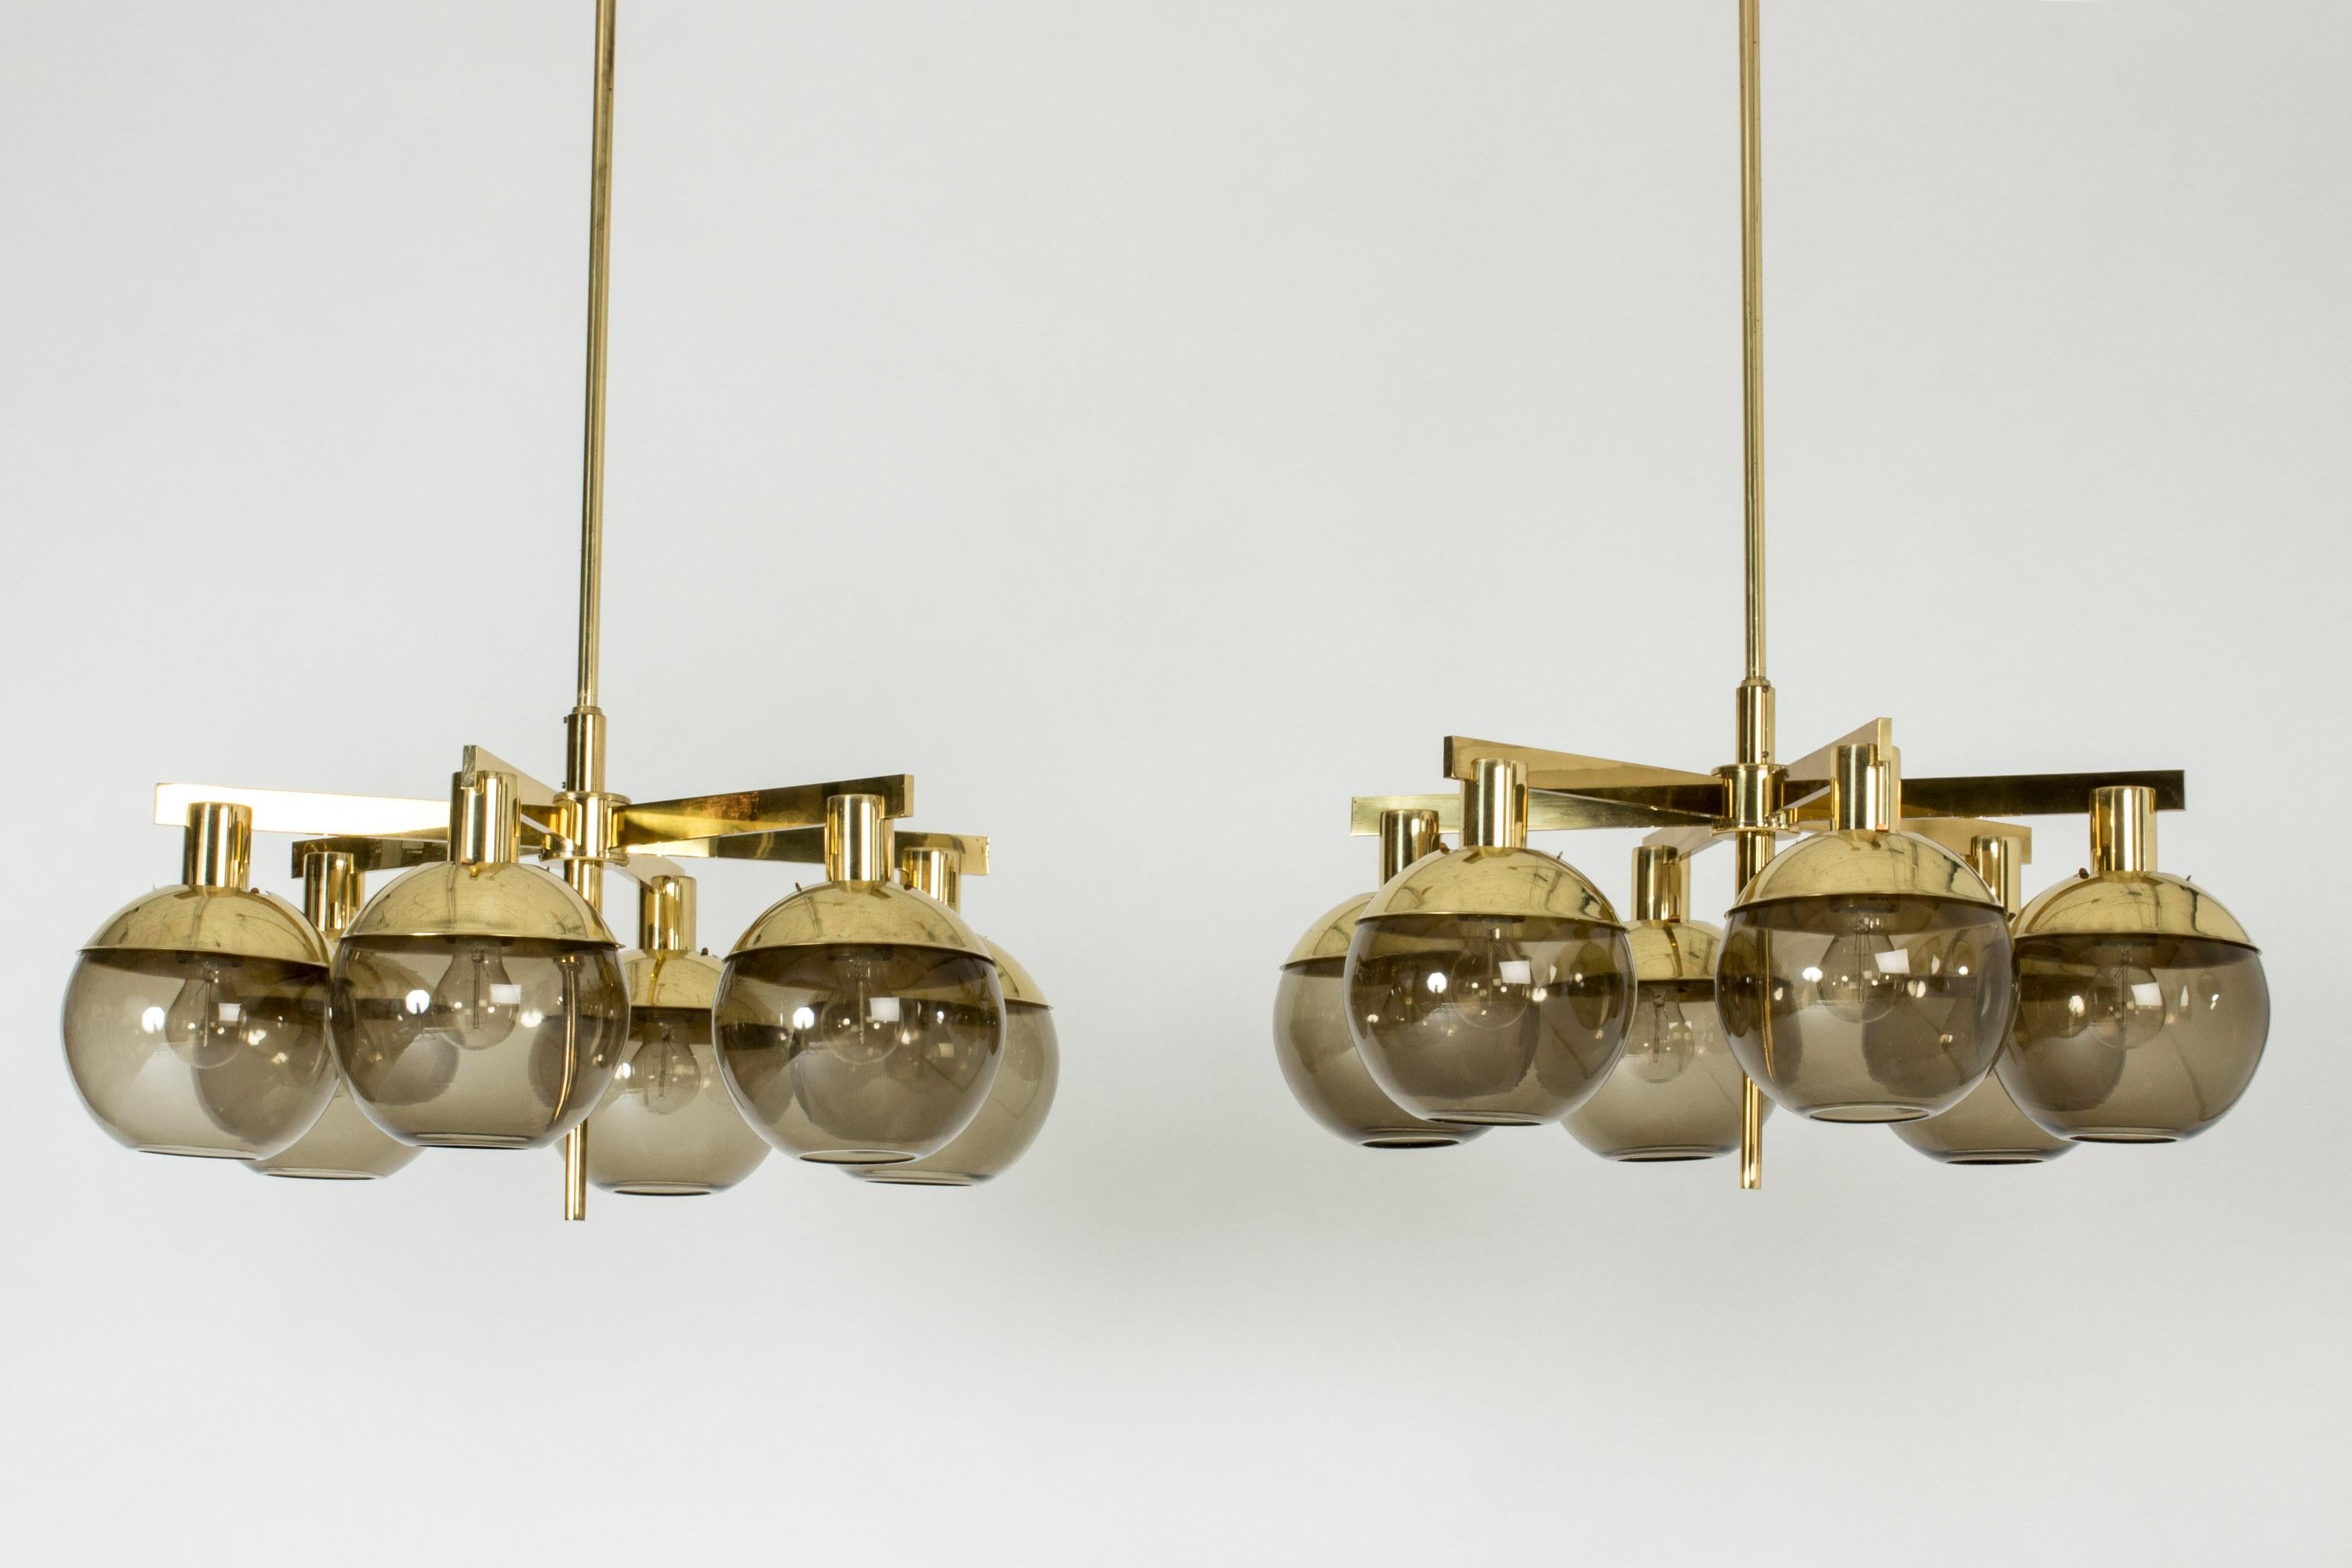 Pair of striking chandeliers by Hans-Agne Jakobsson. Brass frames, each with six arms suspending smoke colored glass shades.